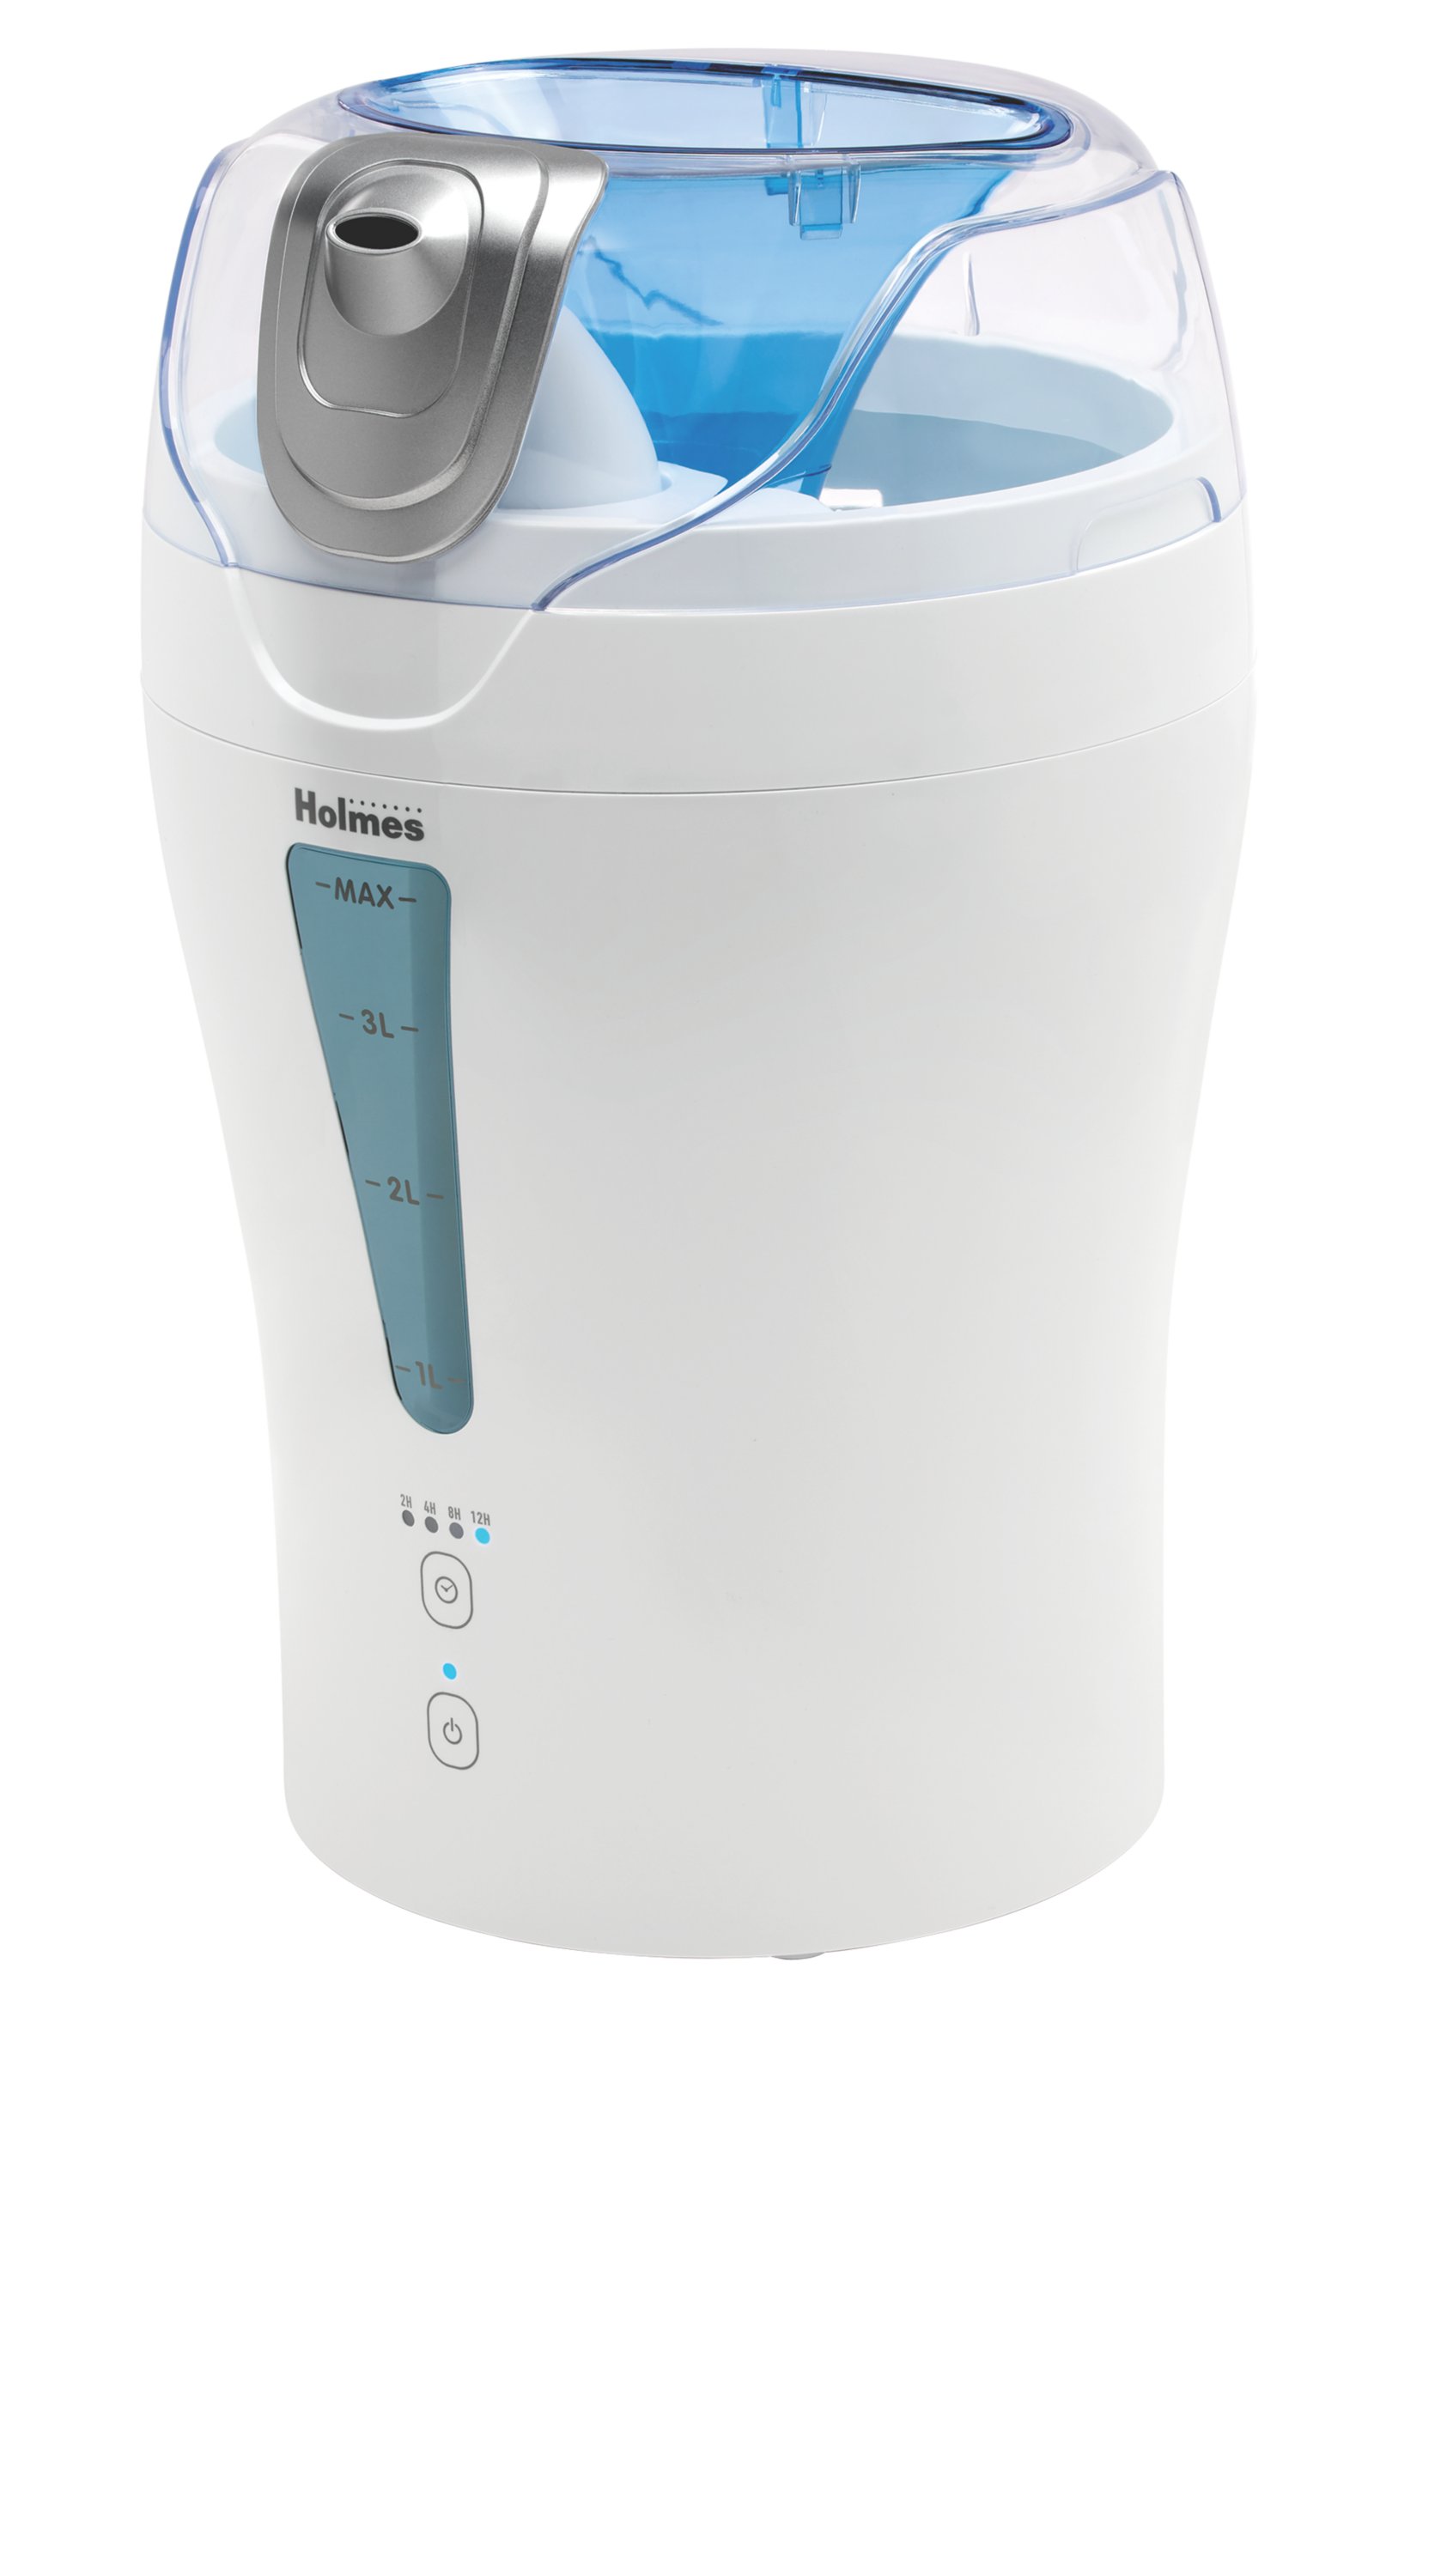 Holmes Ultrasonic Humidifier No Filter Clearance, GET 58% OFF,  www.chocomuseo.com